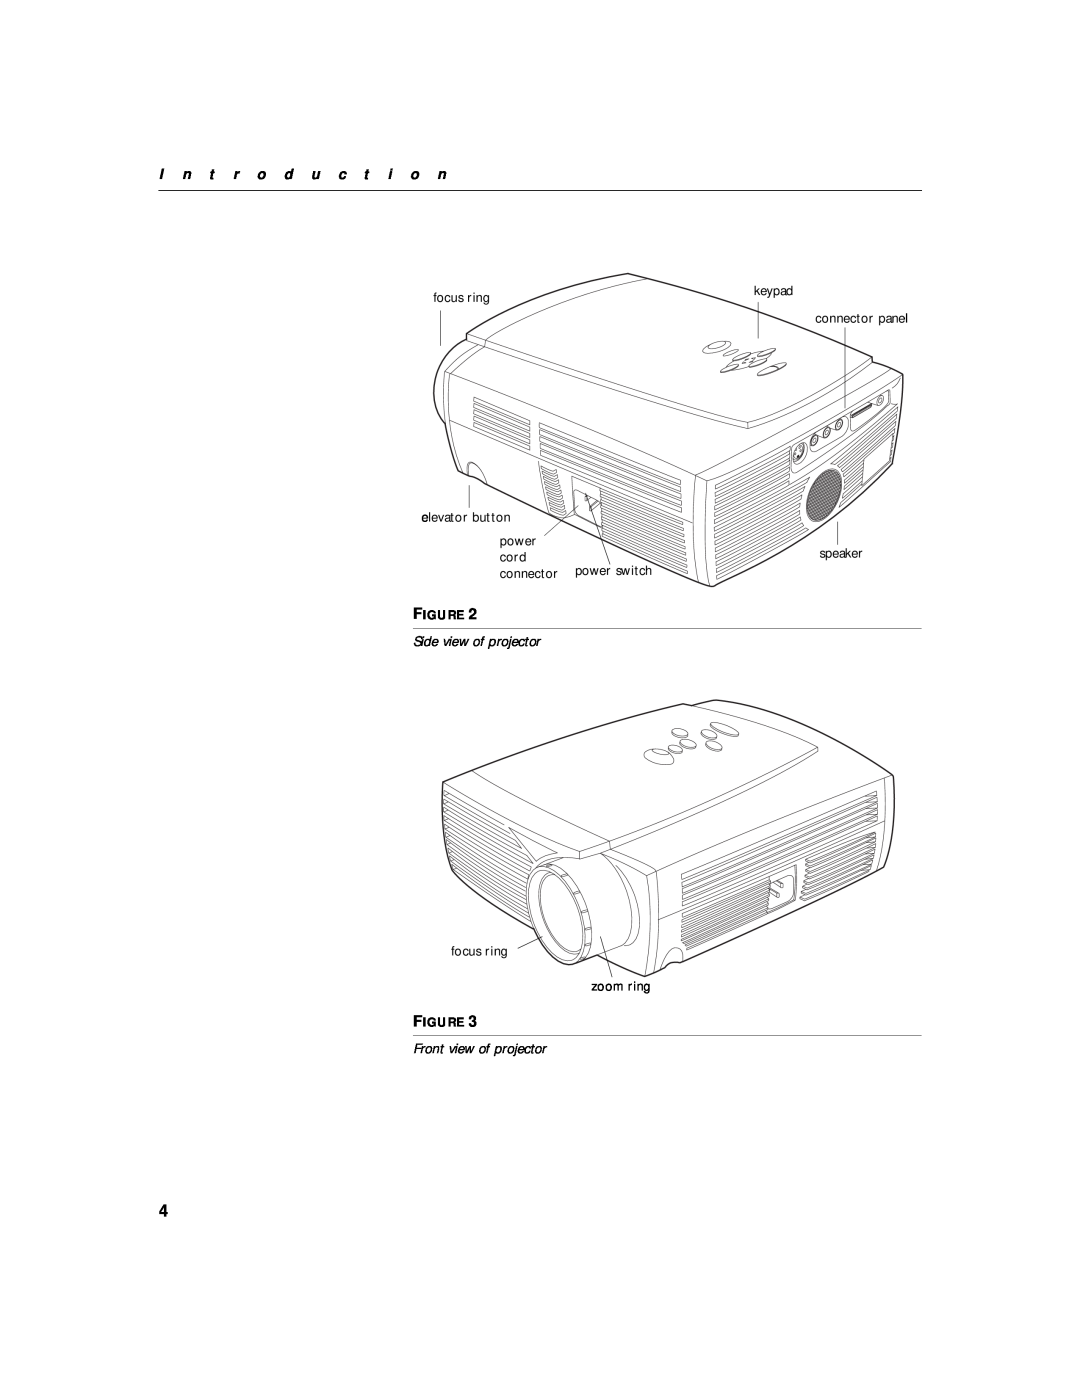 BOXLIGHT CD-550m, CD-450m manual I n t r o d u c t i o n, Side view of projector, Front view of projector, speaker, keypad 